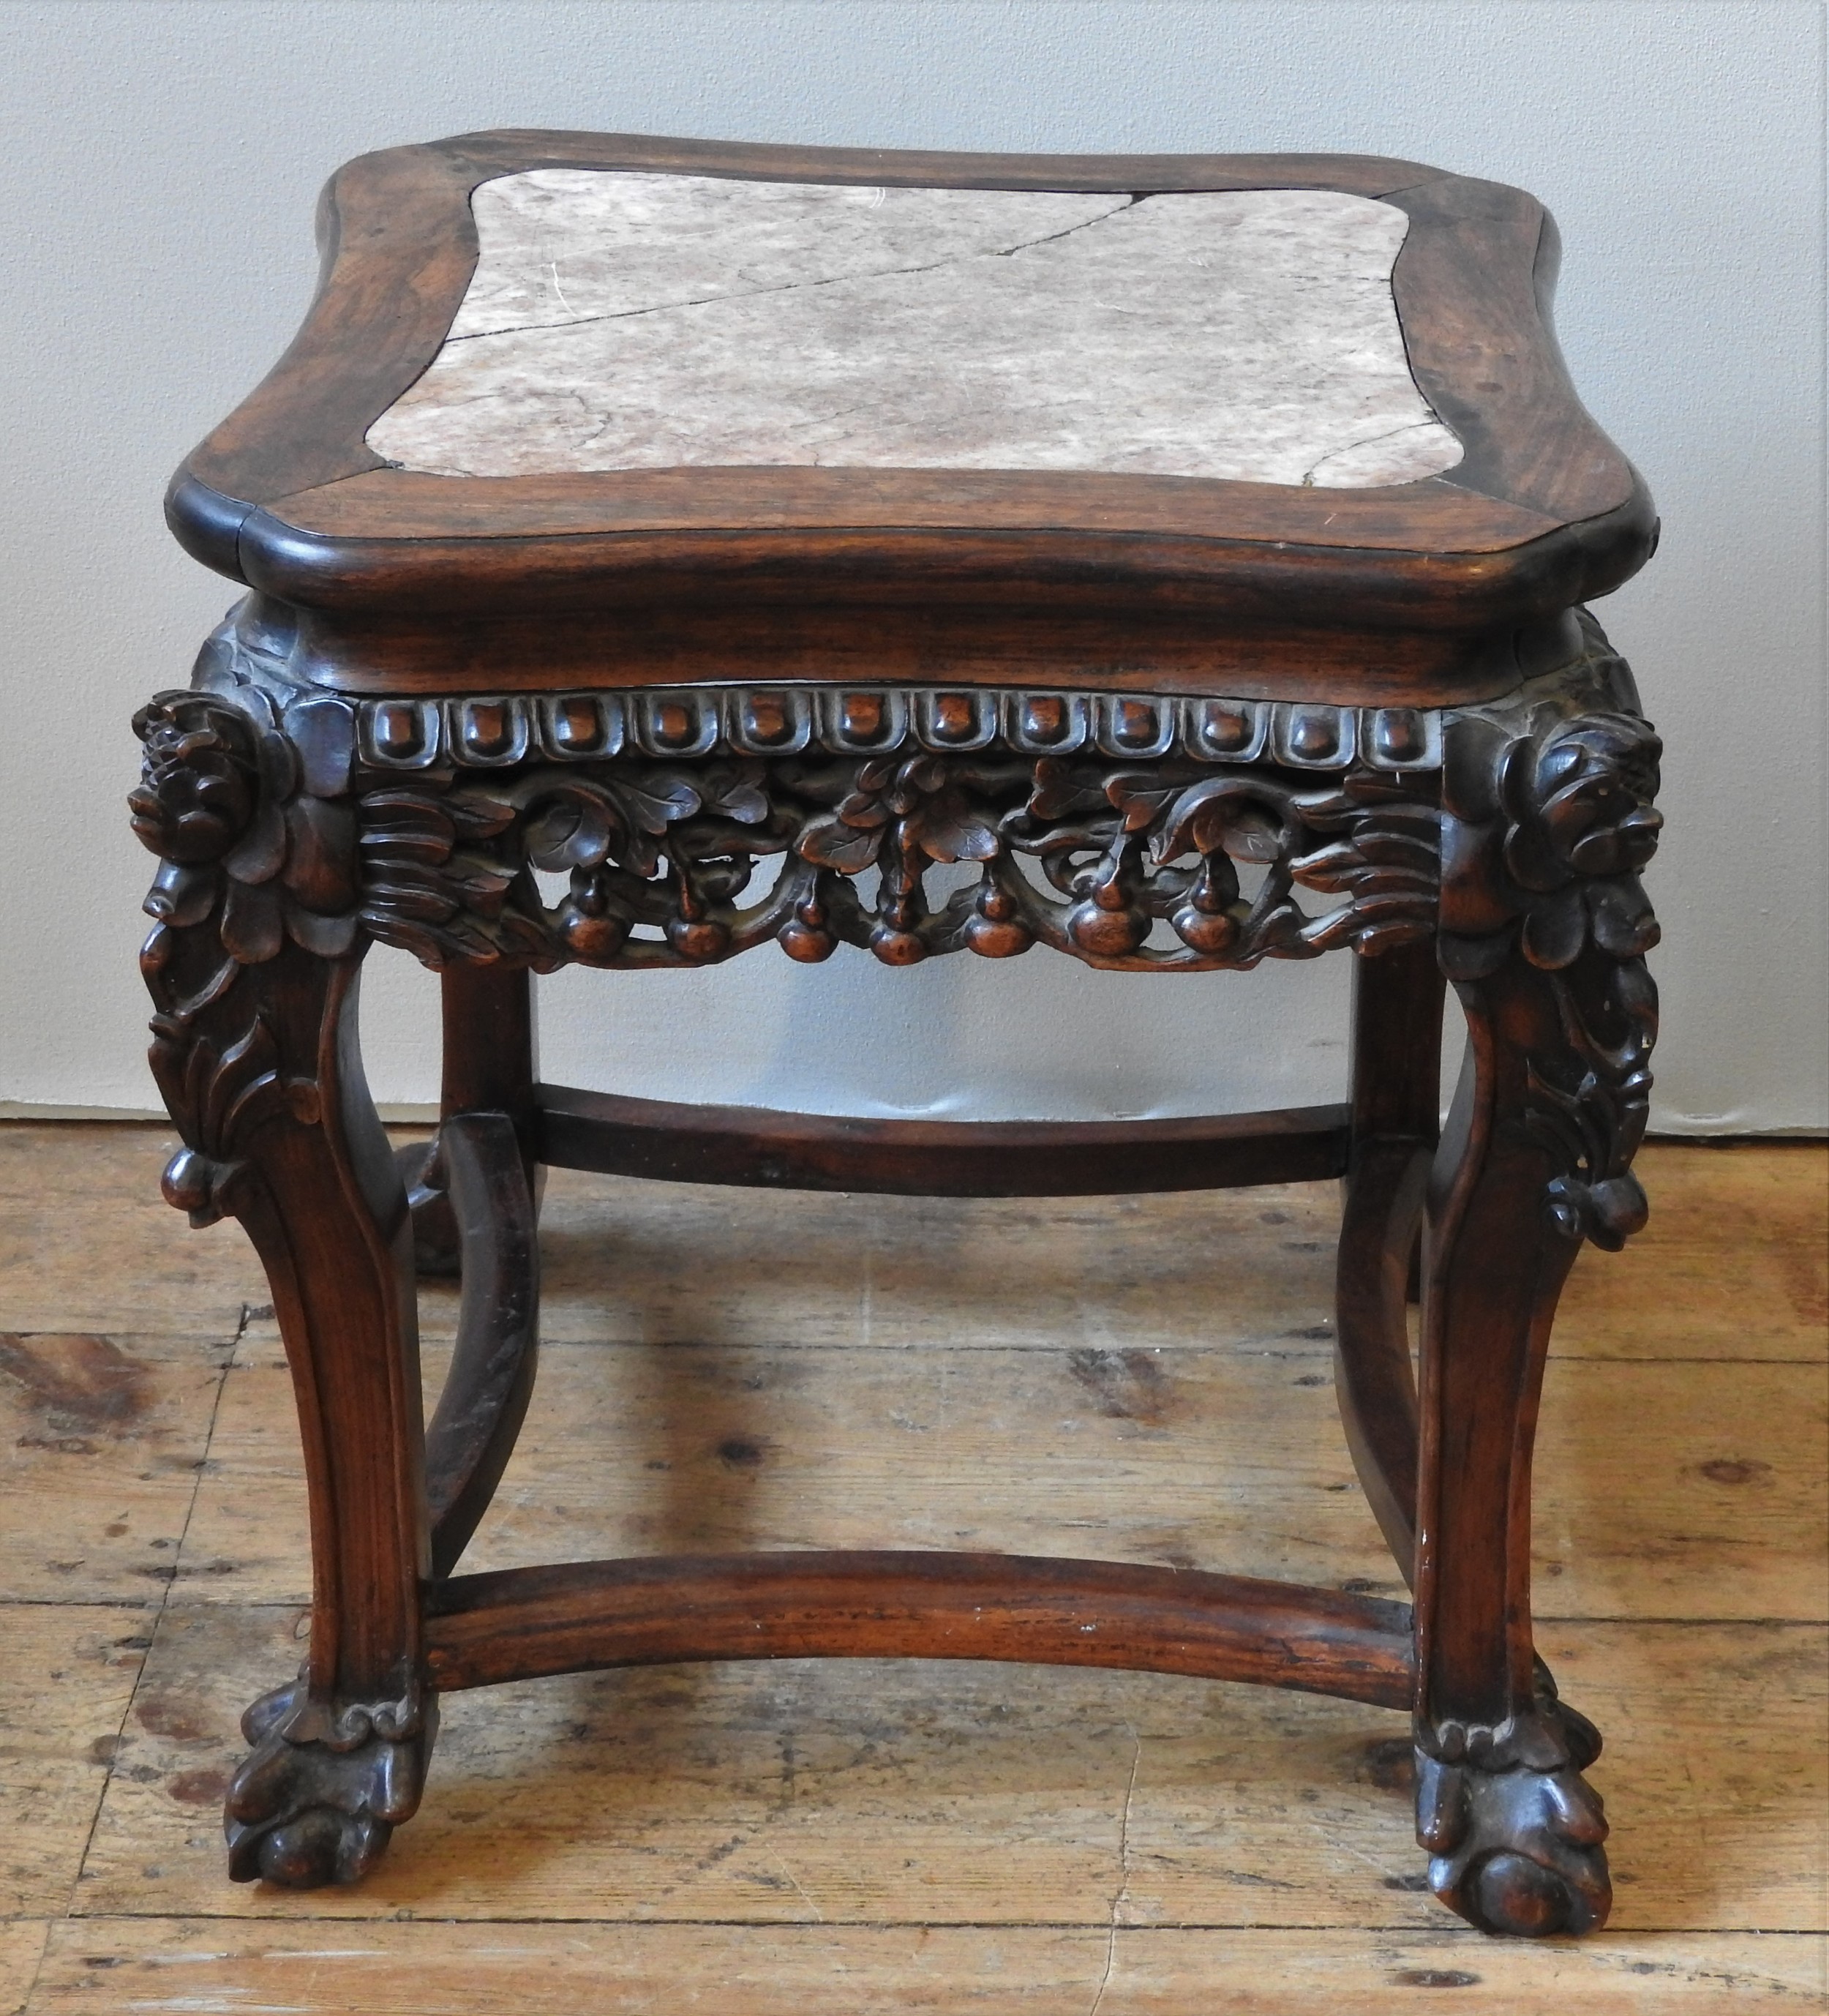 A CHINESE CARVED HARDWOOD MARBLE INSET STAND, Qing dynasty, 19th century, shaped square top with - Image 2 of 2